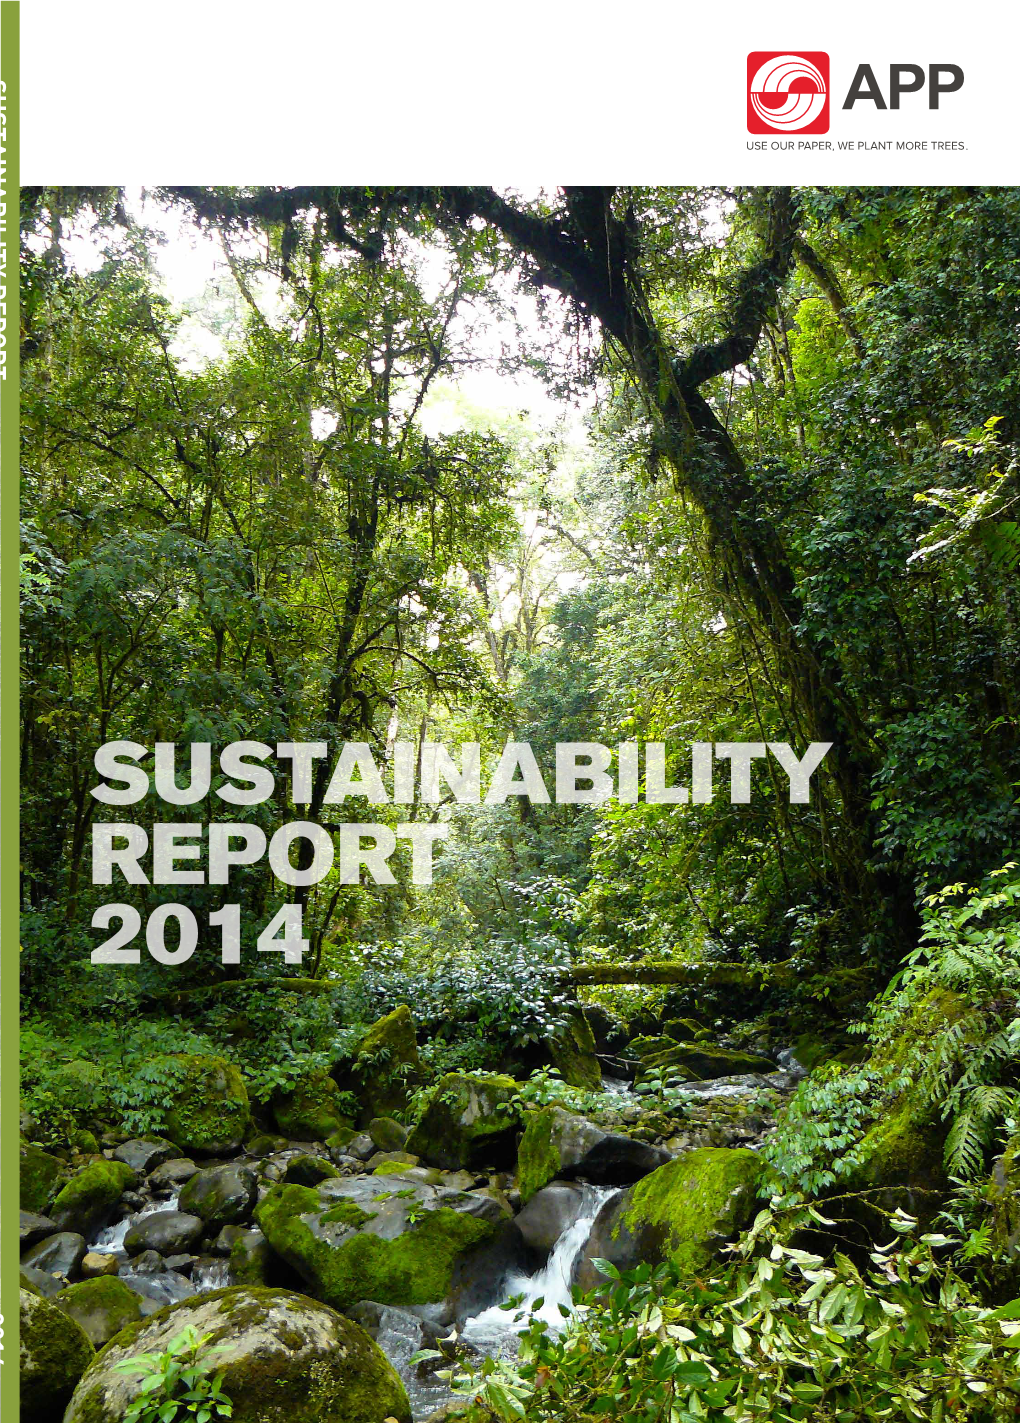 SUSTAINABILITY REPORT 2014 2014 Contact Us